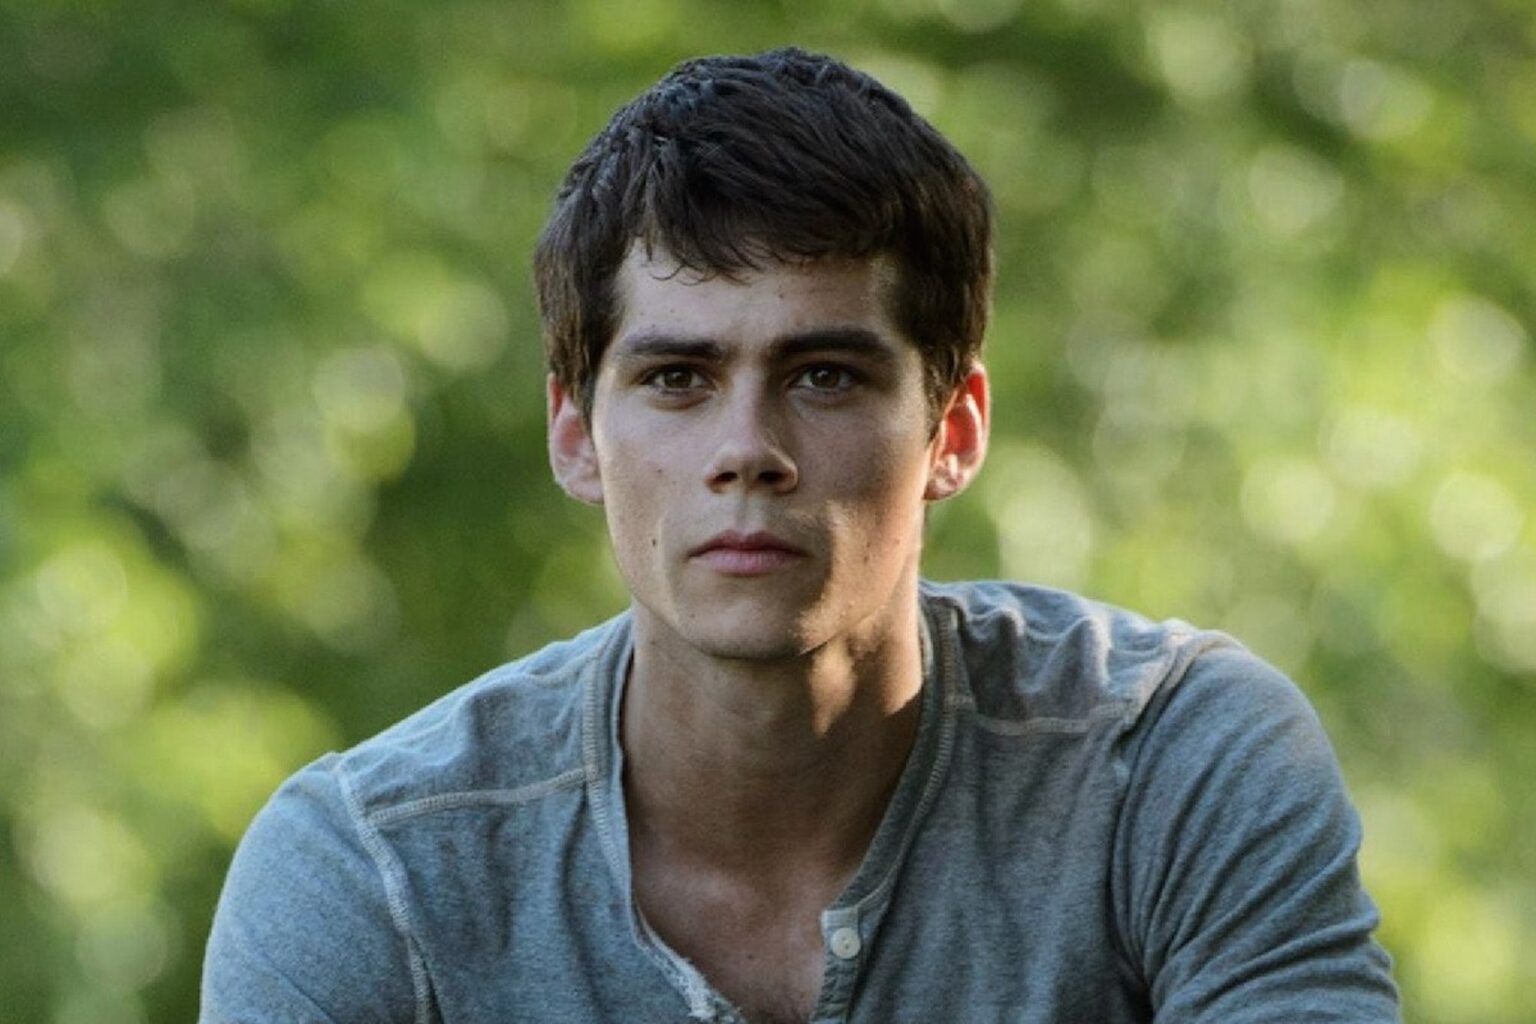 Known for his roles in 'Teen Wolf' and 'The Maze Runner', Dylan O'Brien has amassed an impressive fanbase. Now, they're all wondering who he's dating!